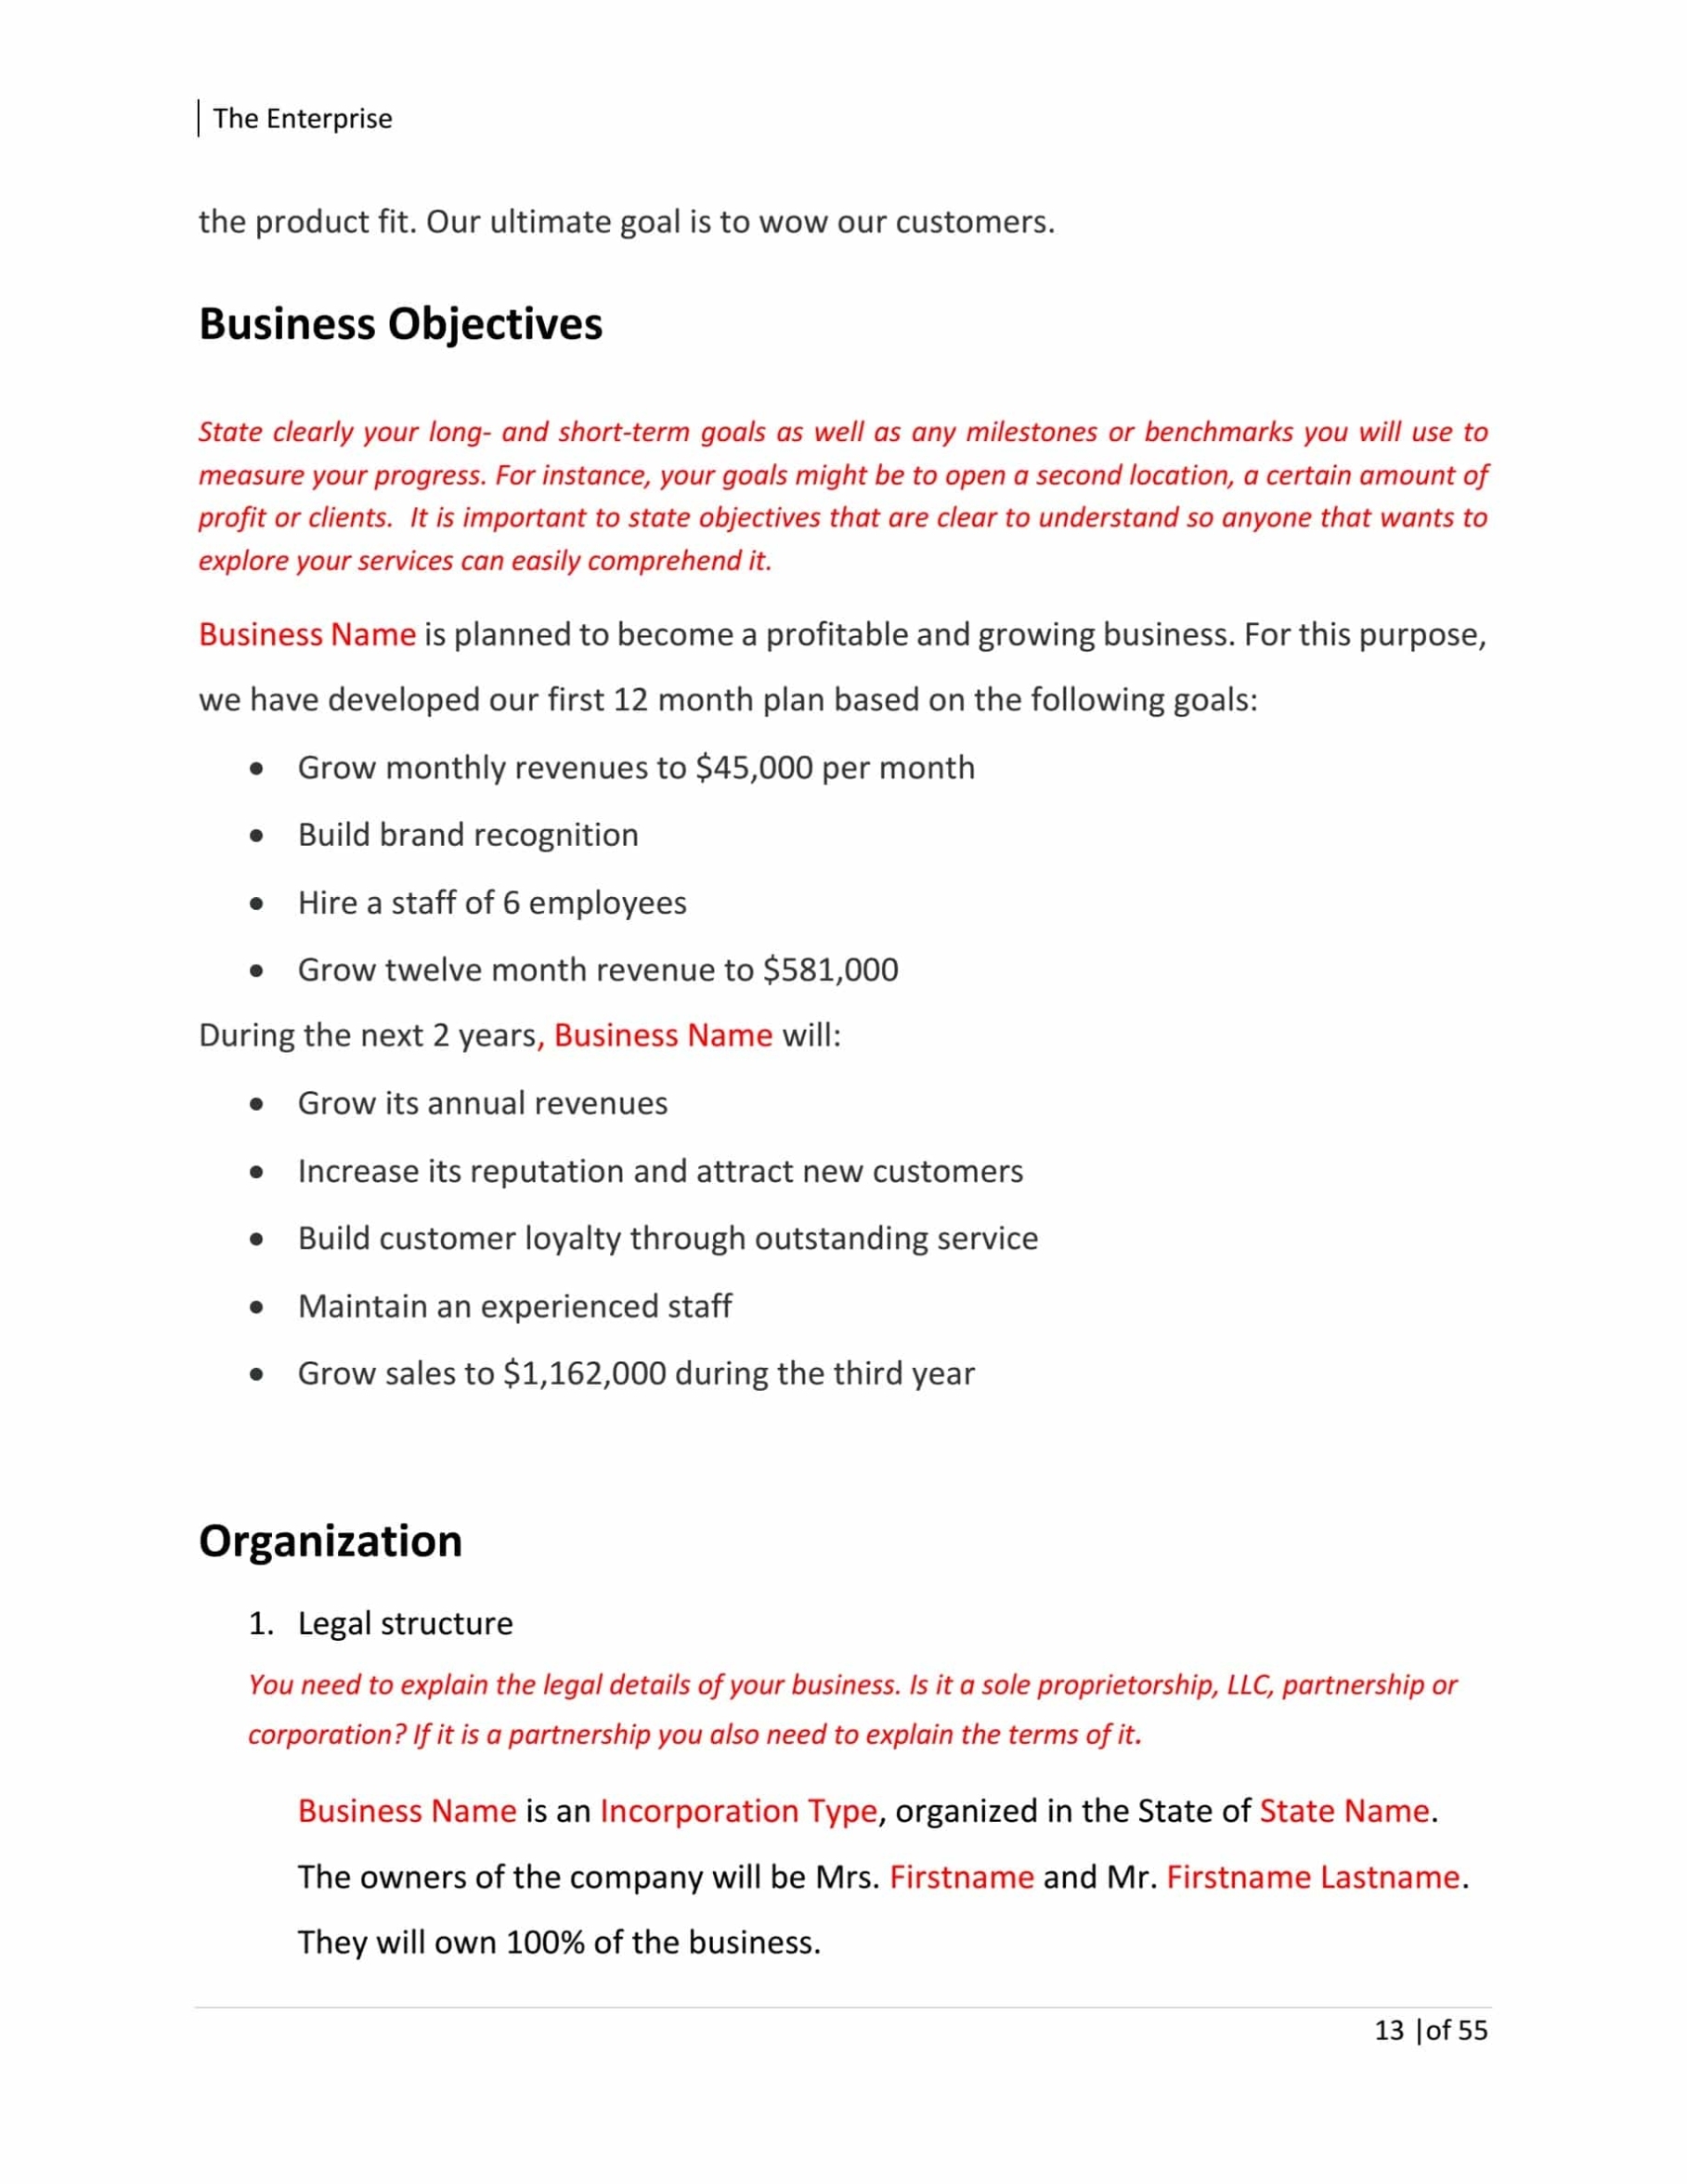 Online Fashion Boutique Business Plan Template Sample Pages - Black Box in Business Plan Template For Clothing Line